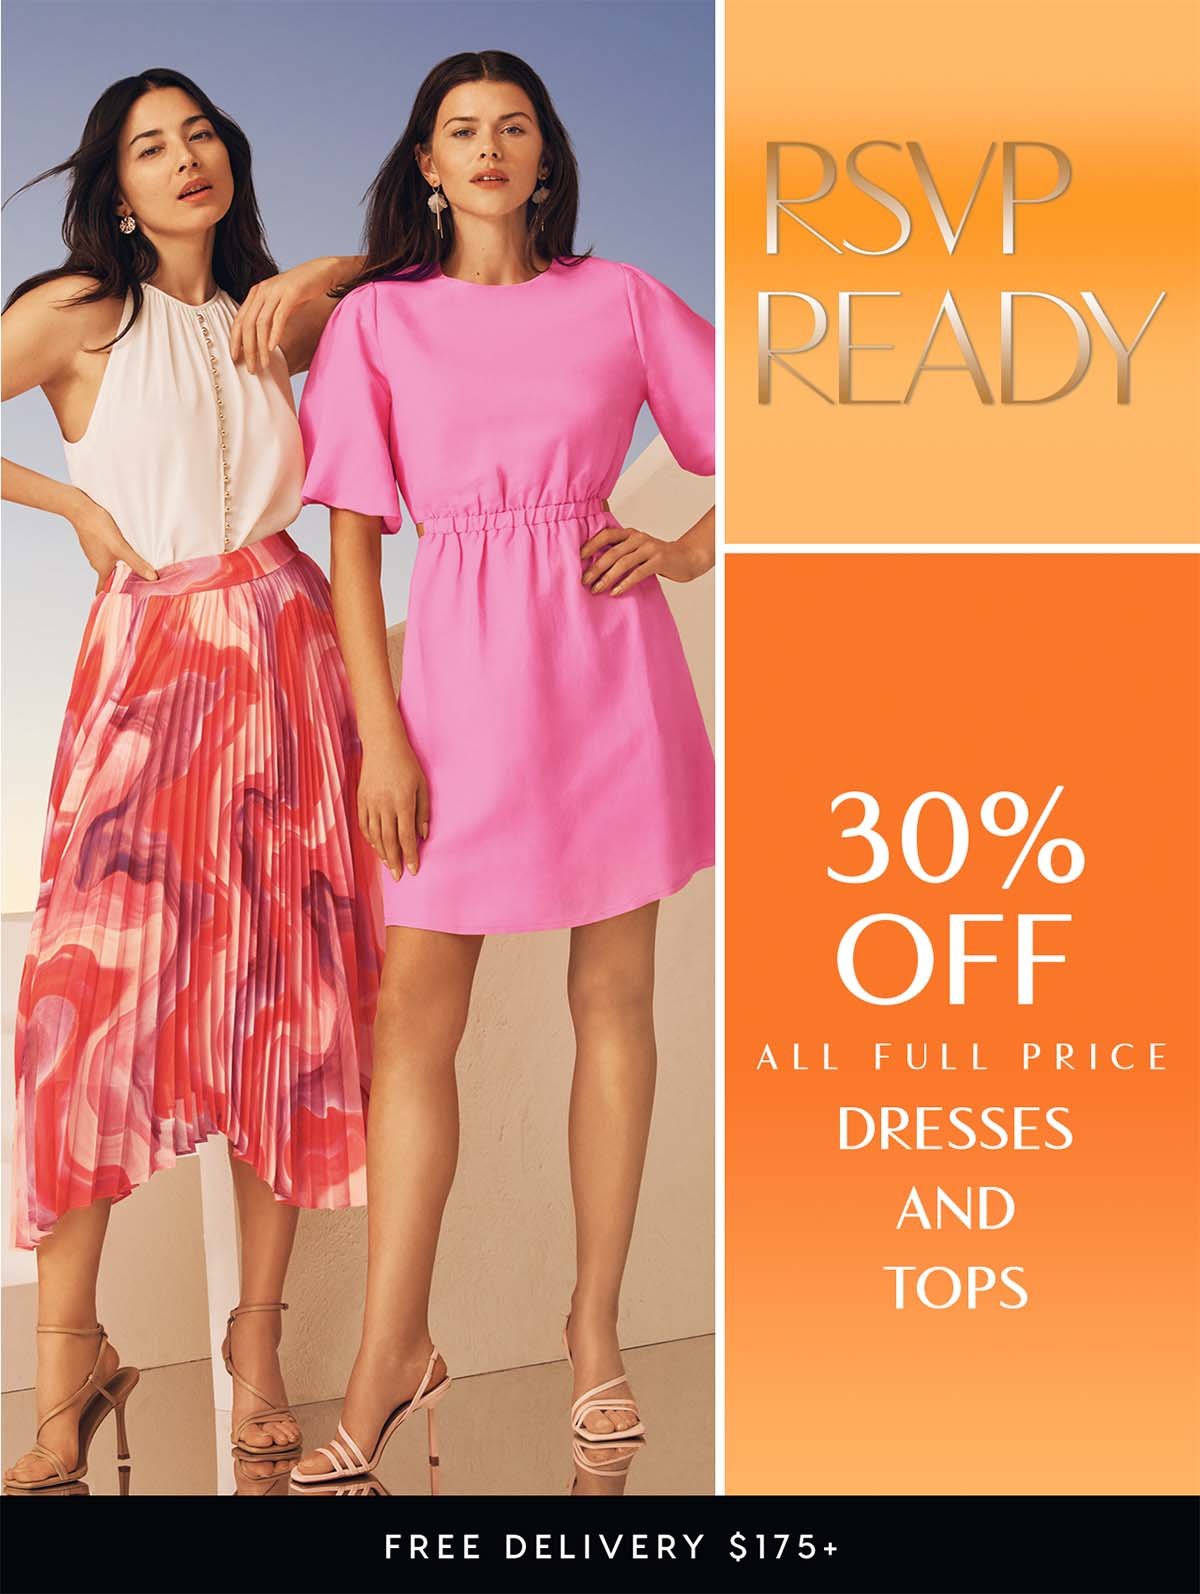 RSVP Yes. 30% Off All Full Price Dresses & Tops